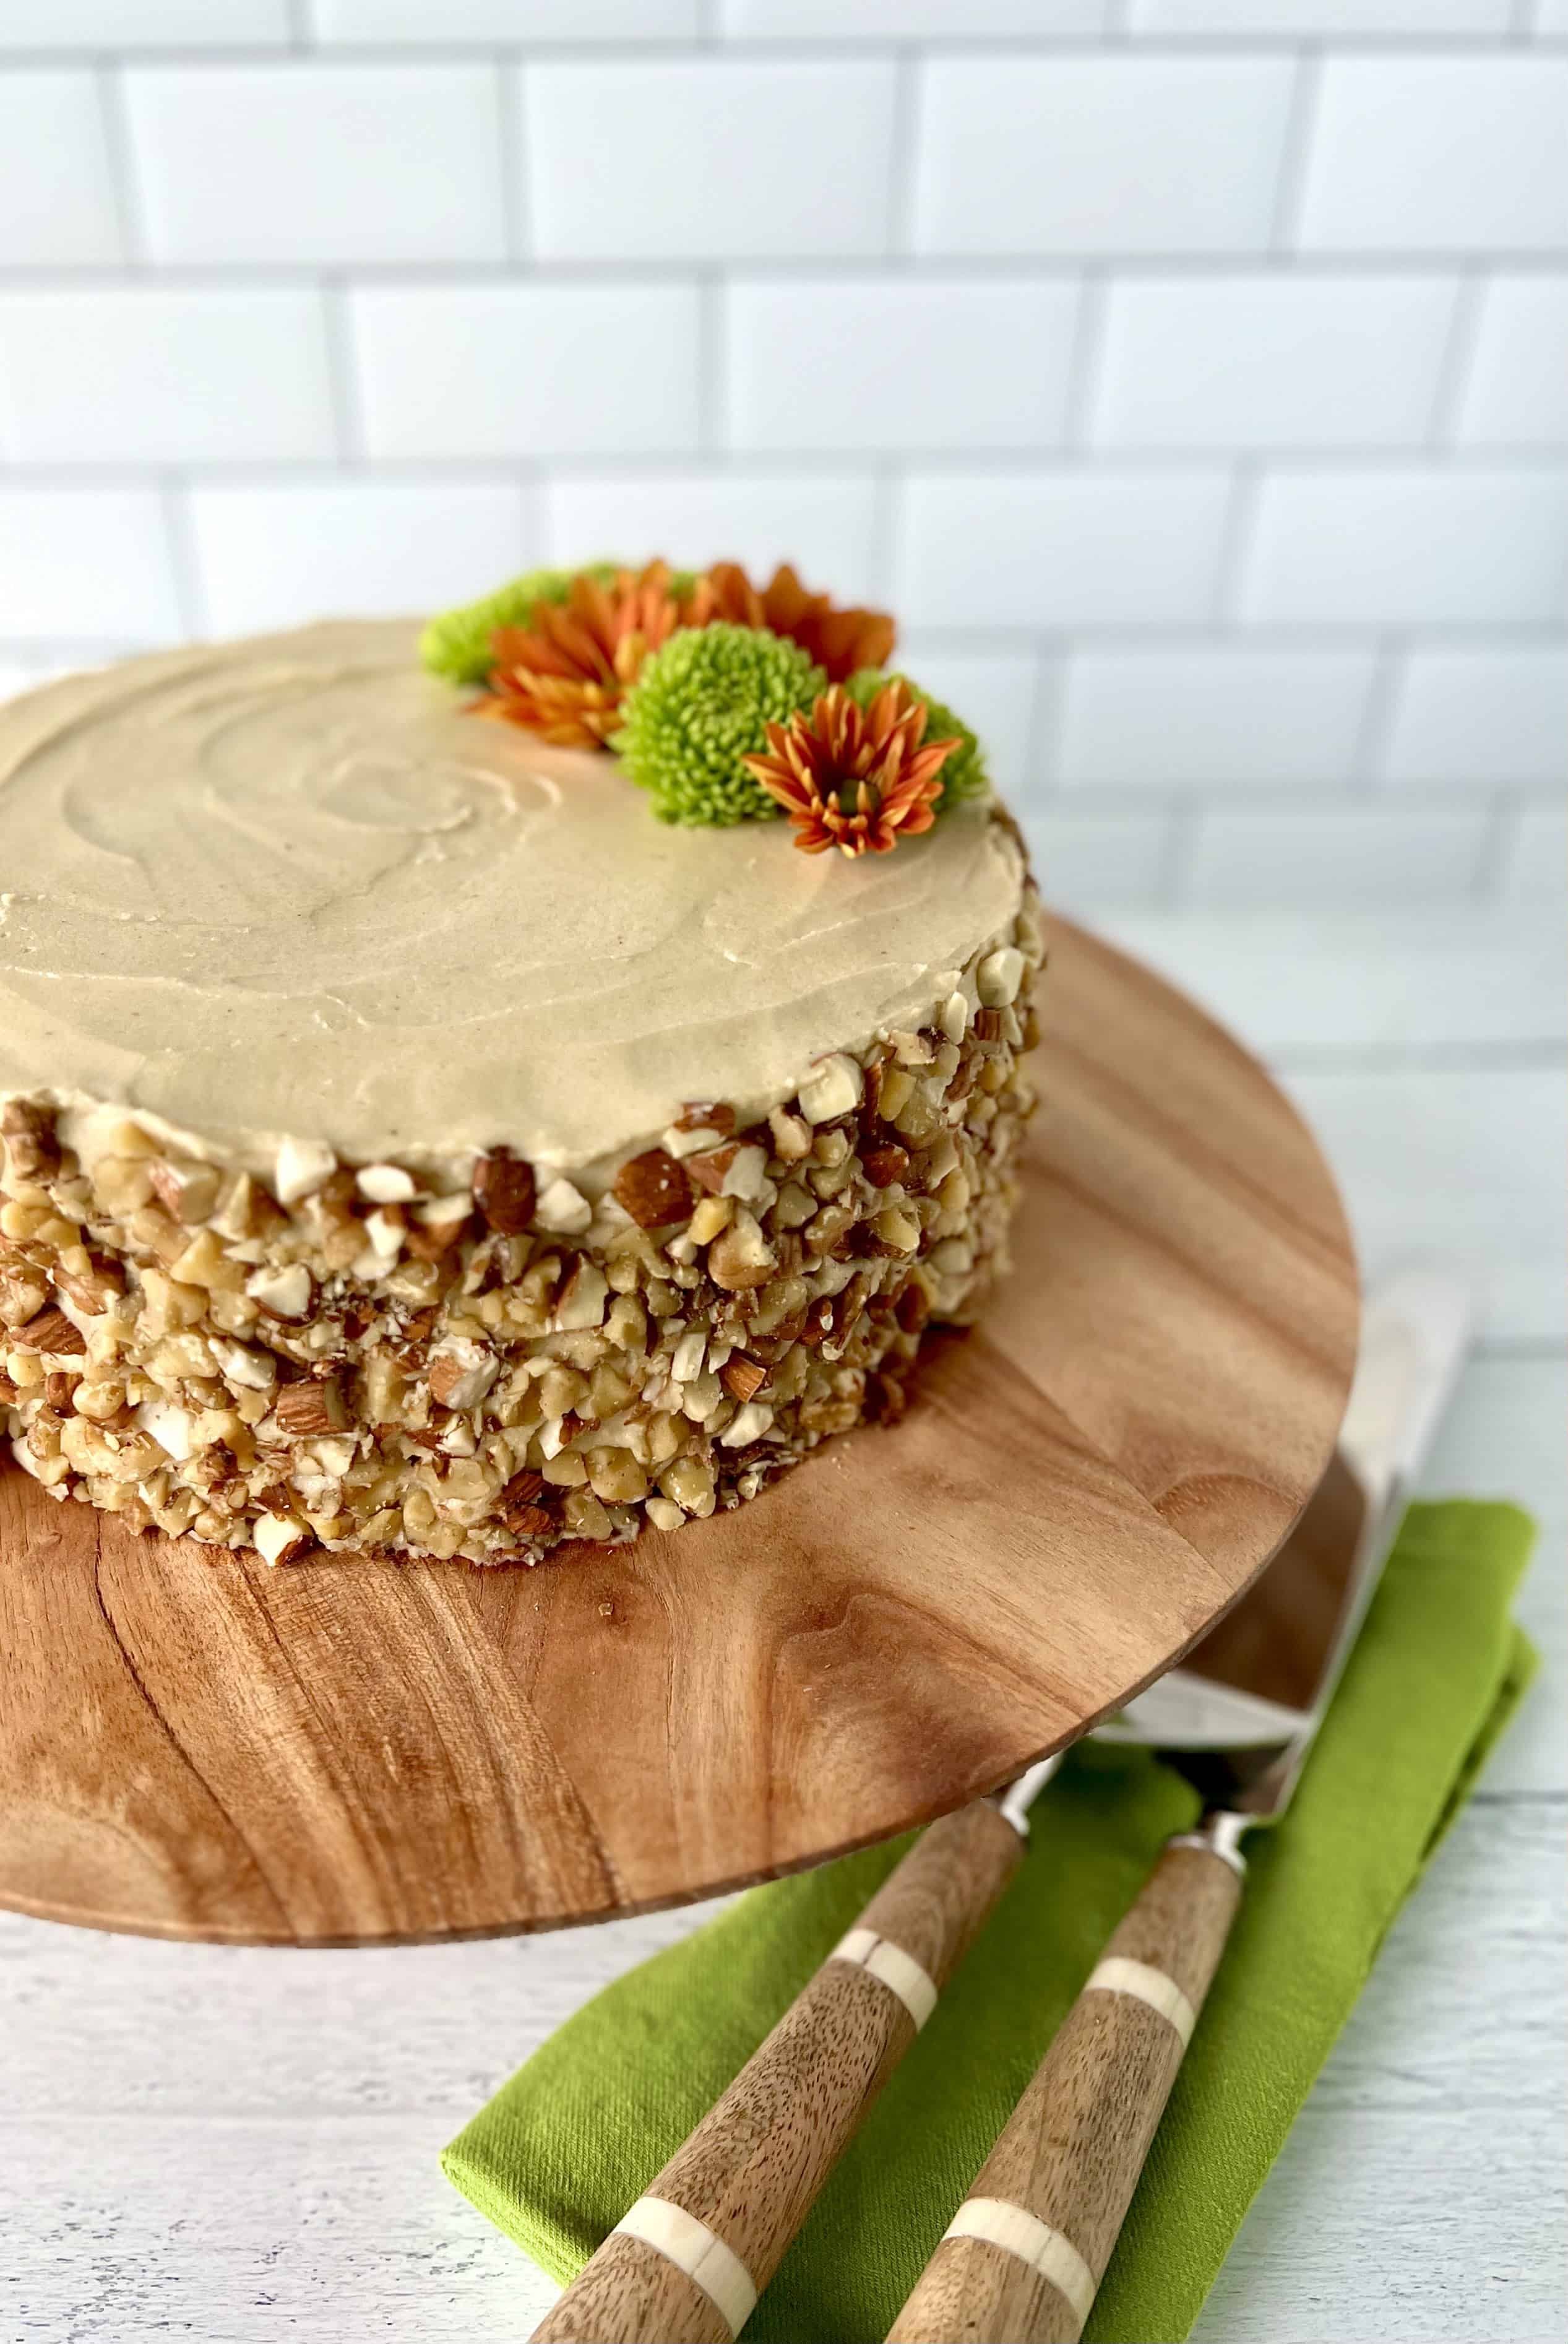 Healthy carrot cake on a wooden cake stand.